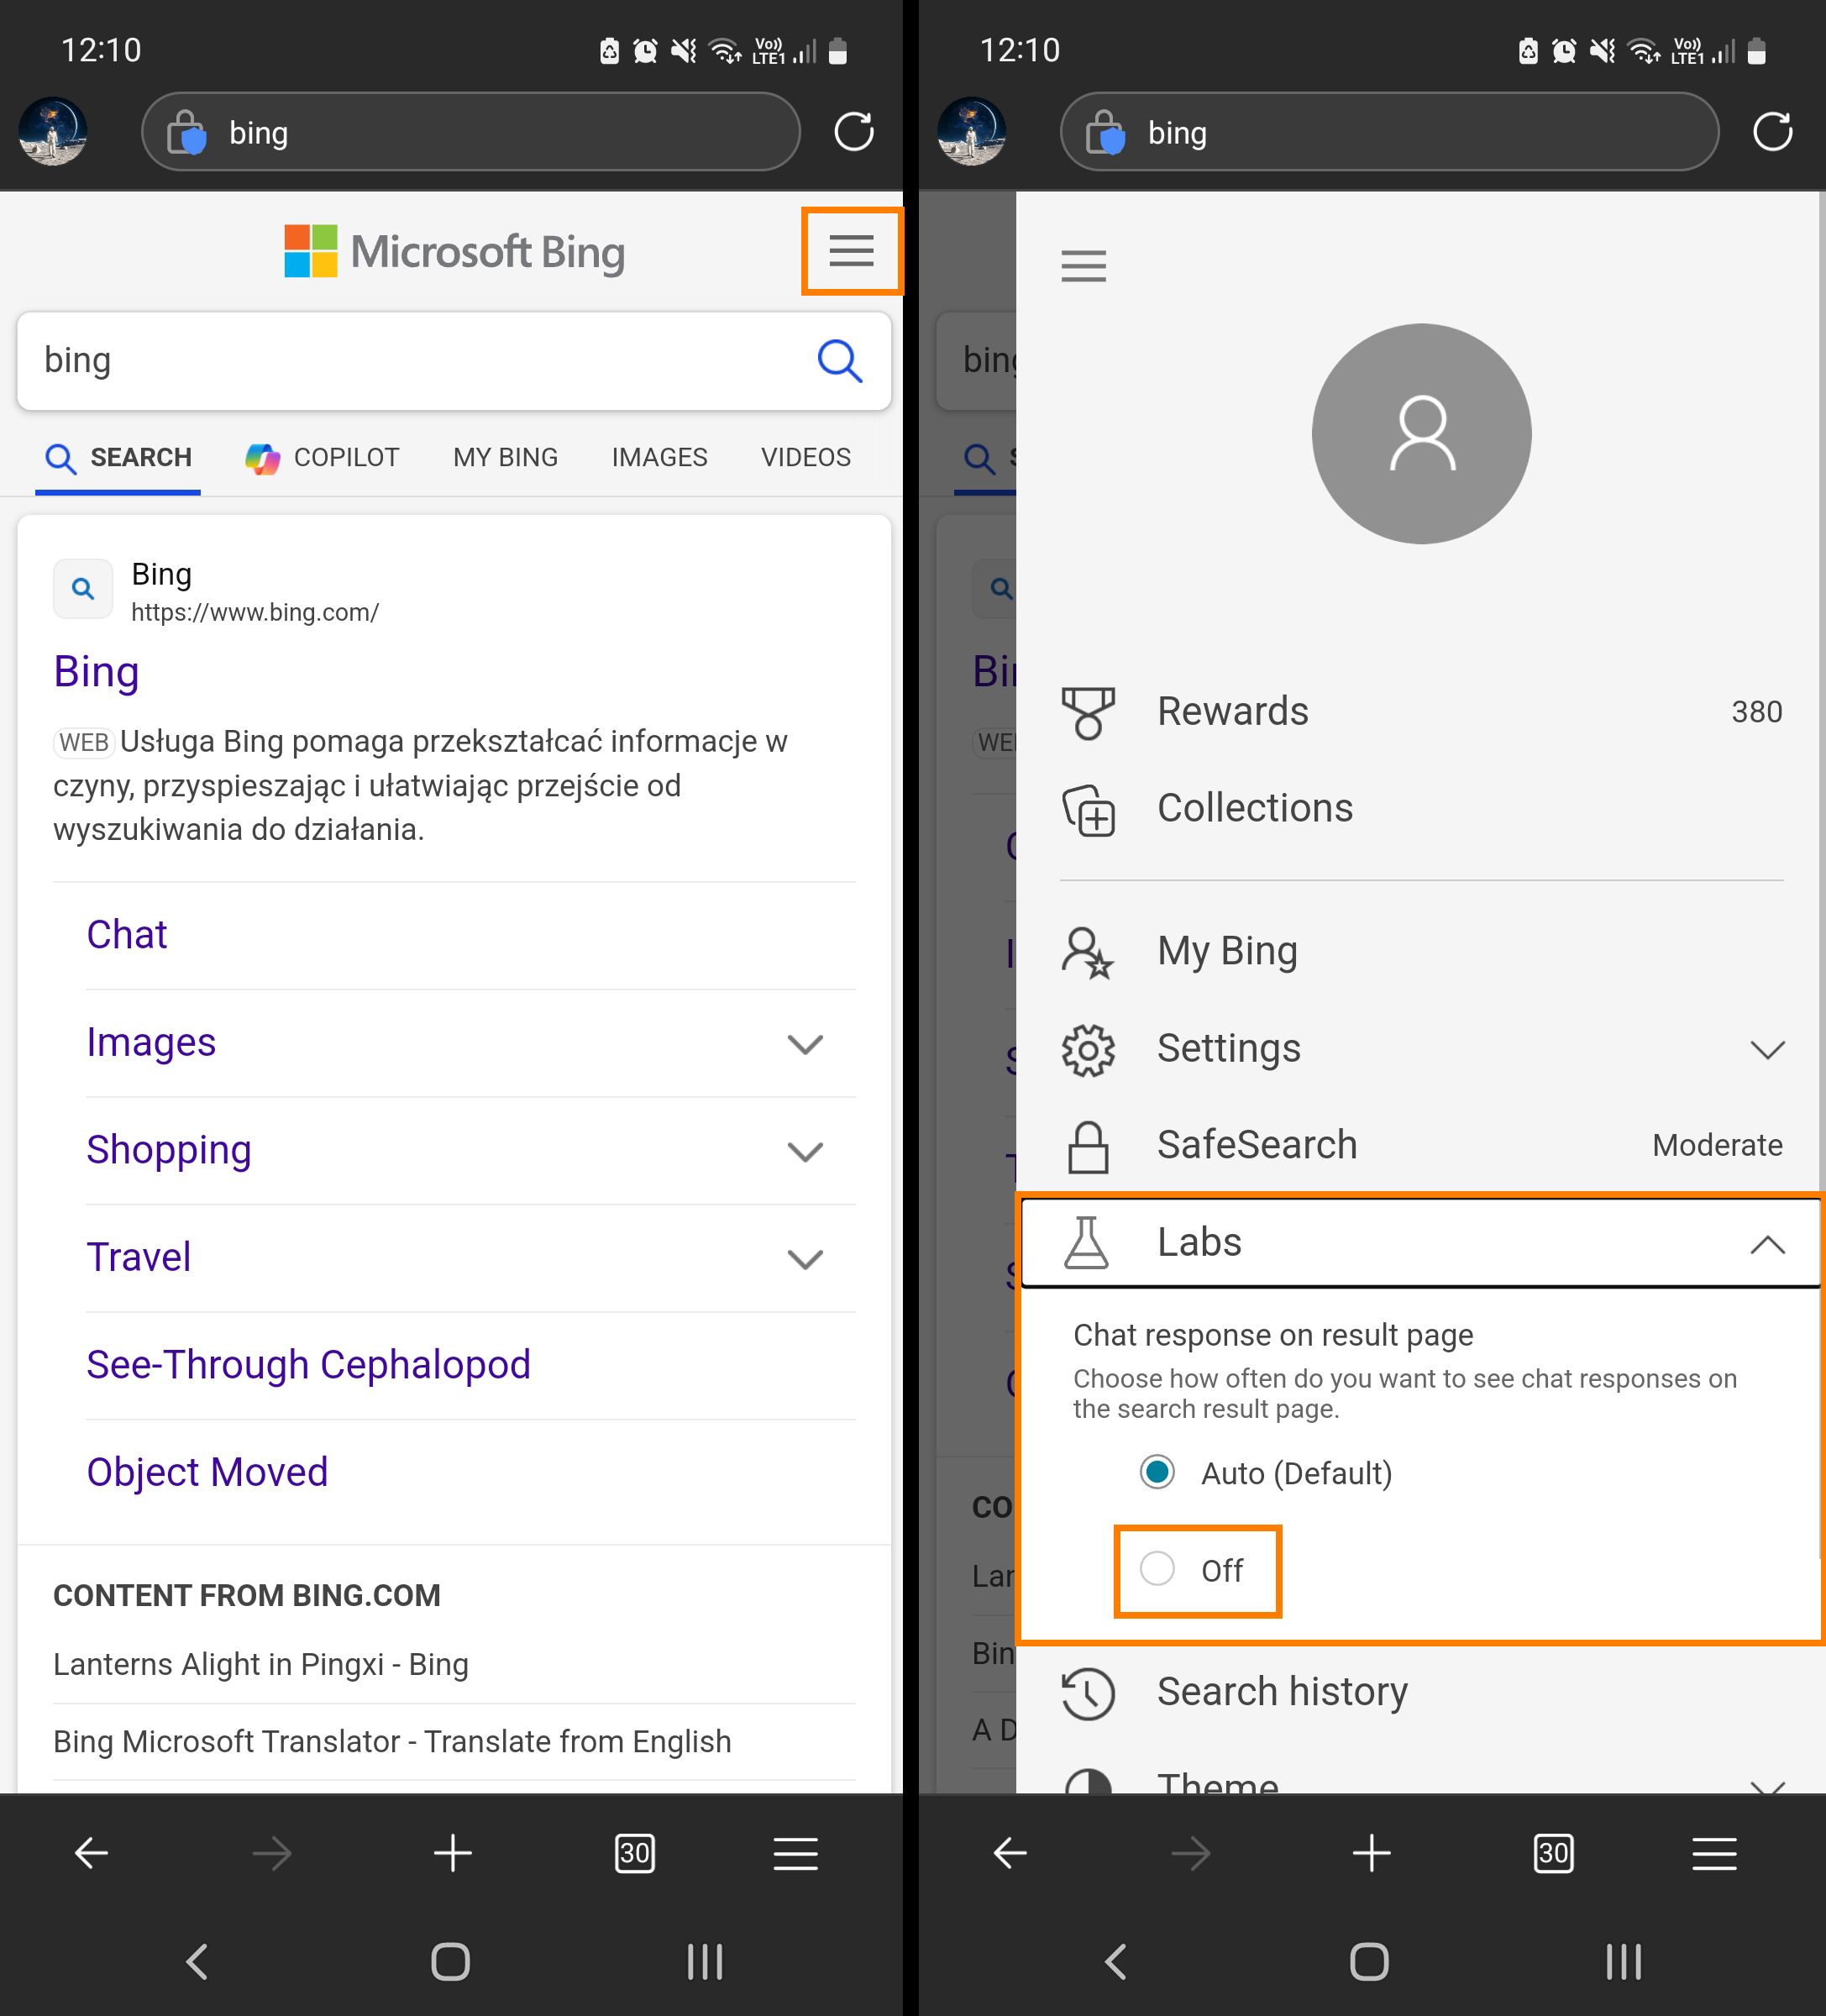 How to Turn Off AI Copilot Responses in Bing Search